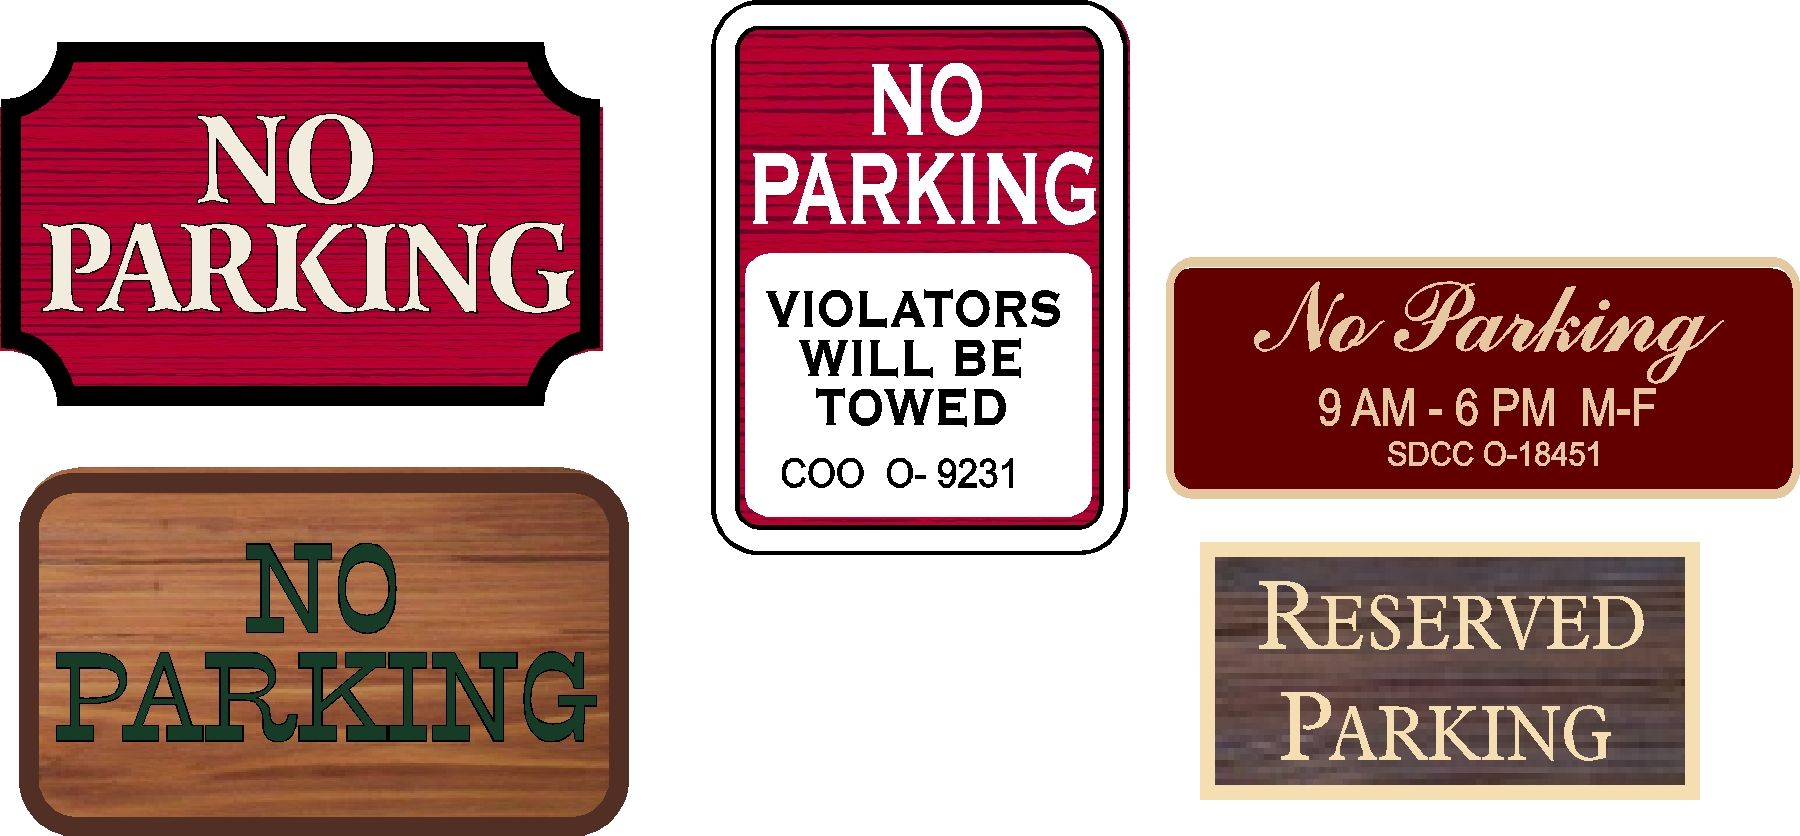 H17341- Carved and Sandblasted Wood Grain HDU "No Parking"  and Reserved Parking Signs